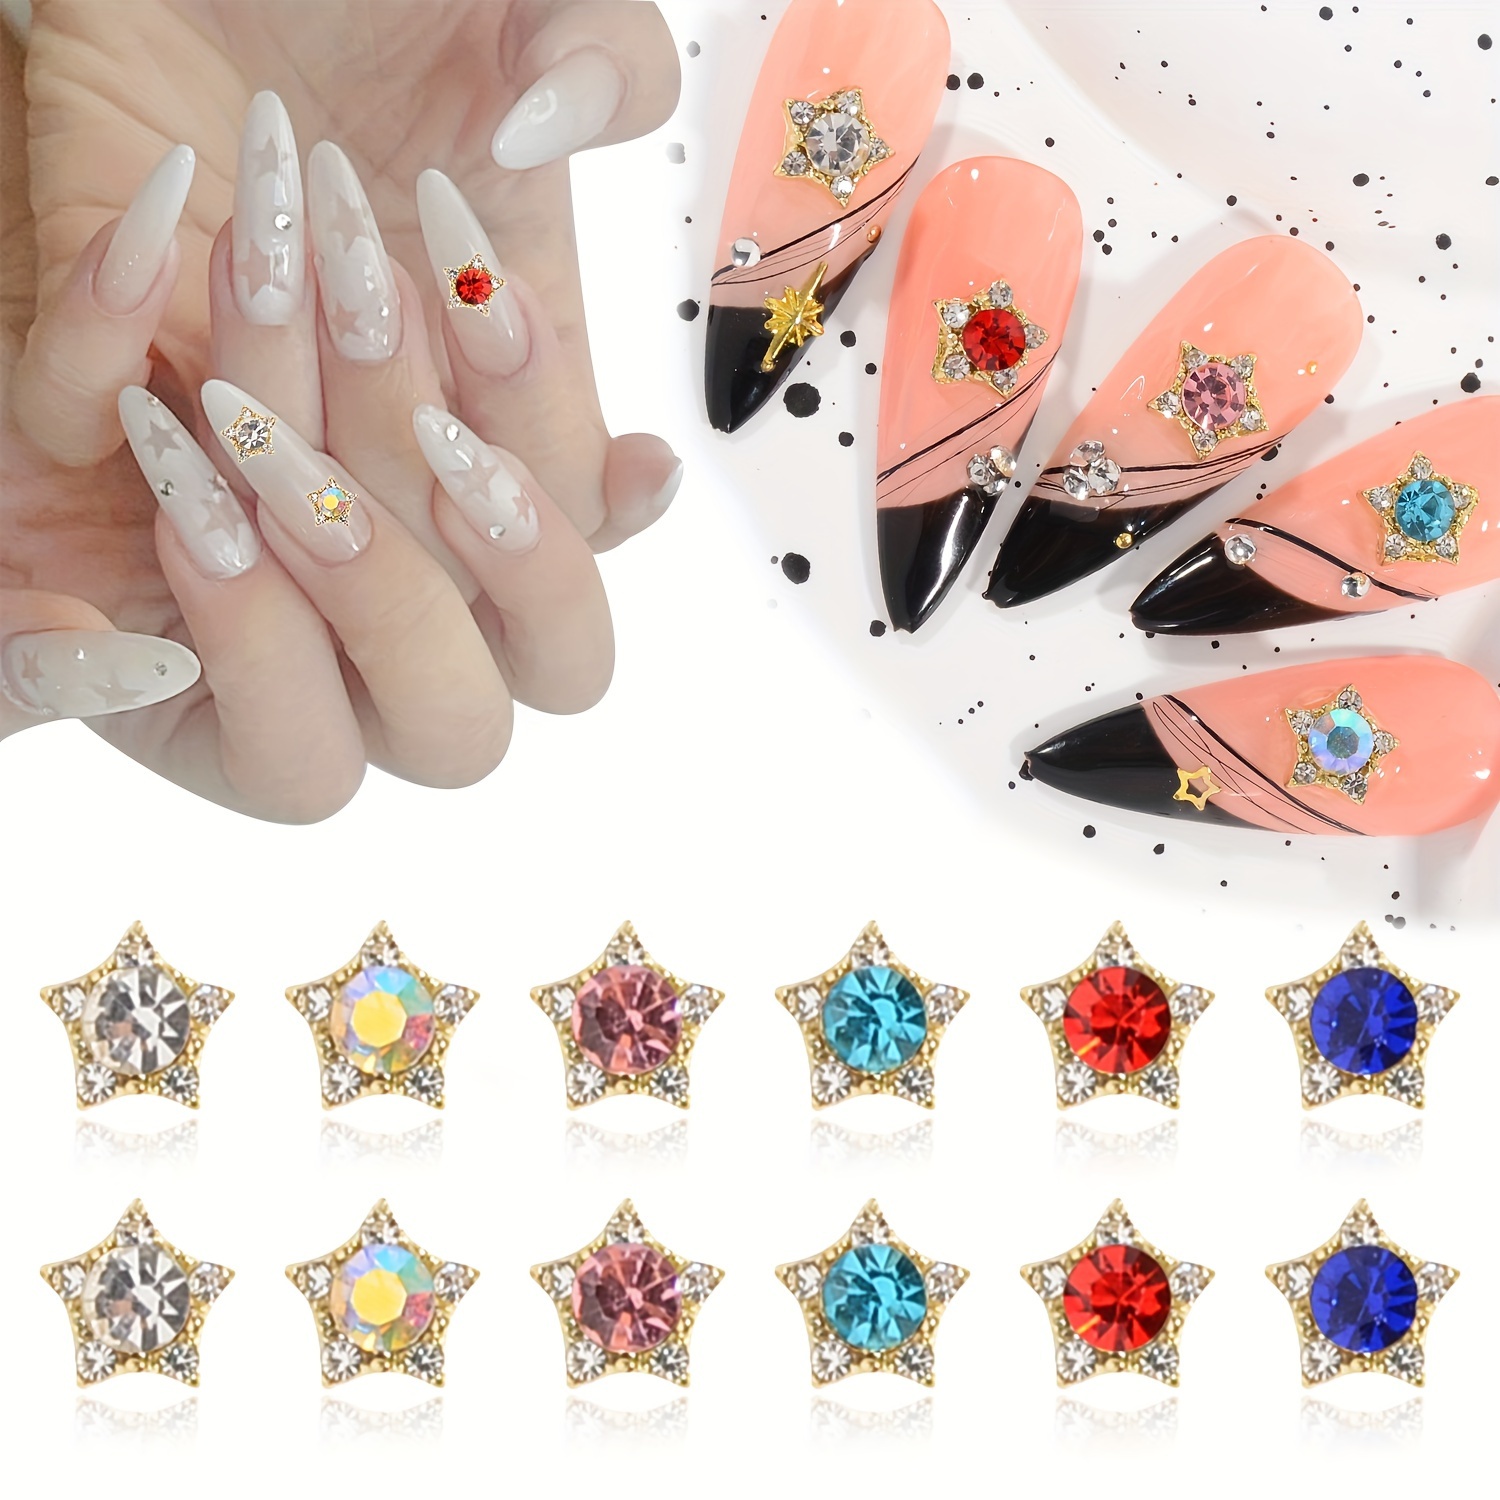 Zircon Saturn Nail Art Charms Stars Chain Decoration Glitter Metal Silver Gold  Rhinestones for Nails Crystals Accessories Y2k - AliExpress